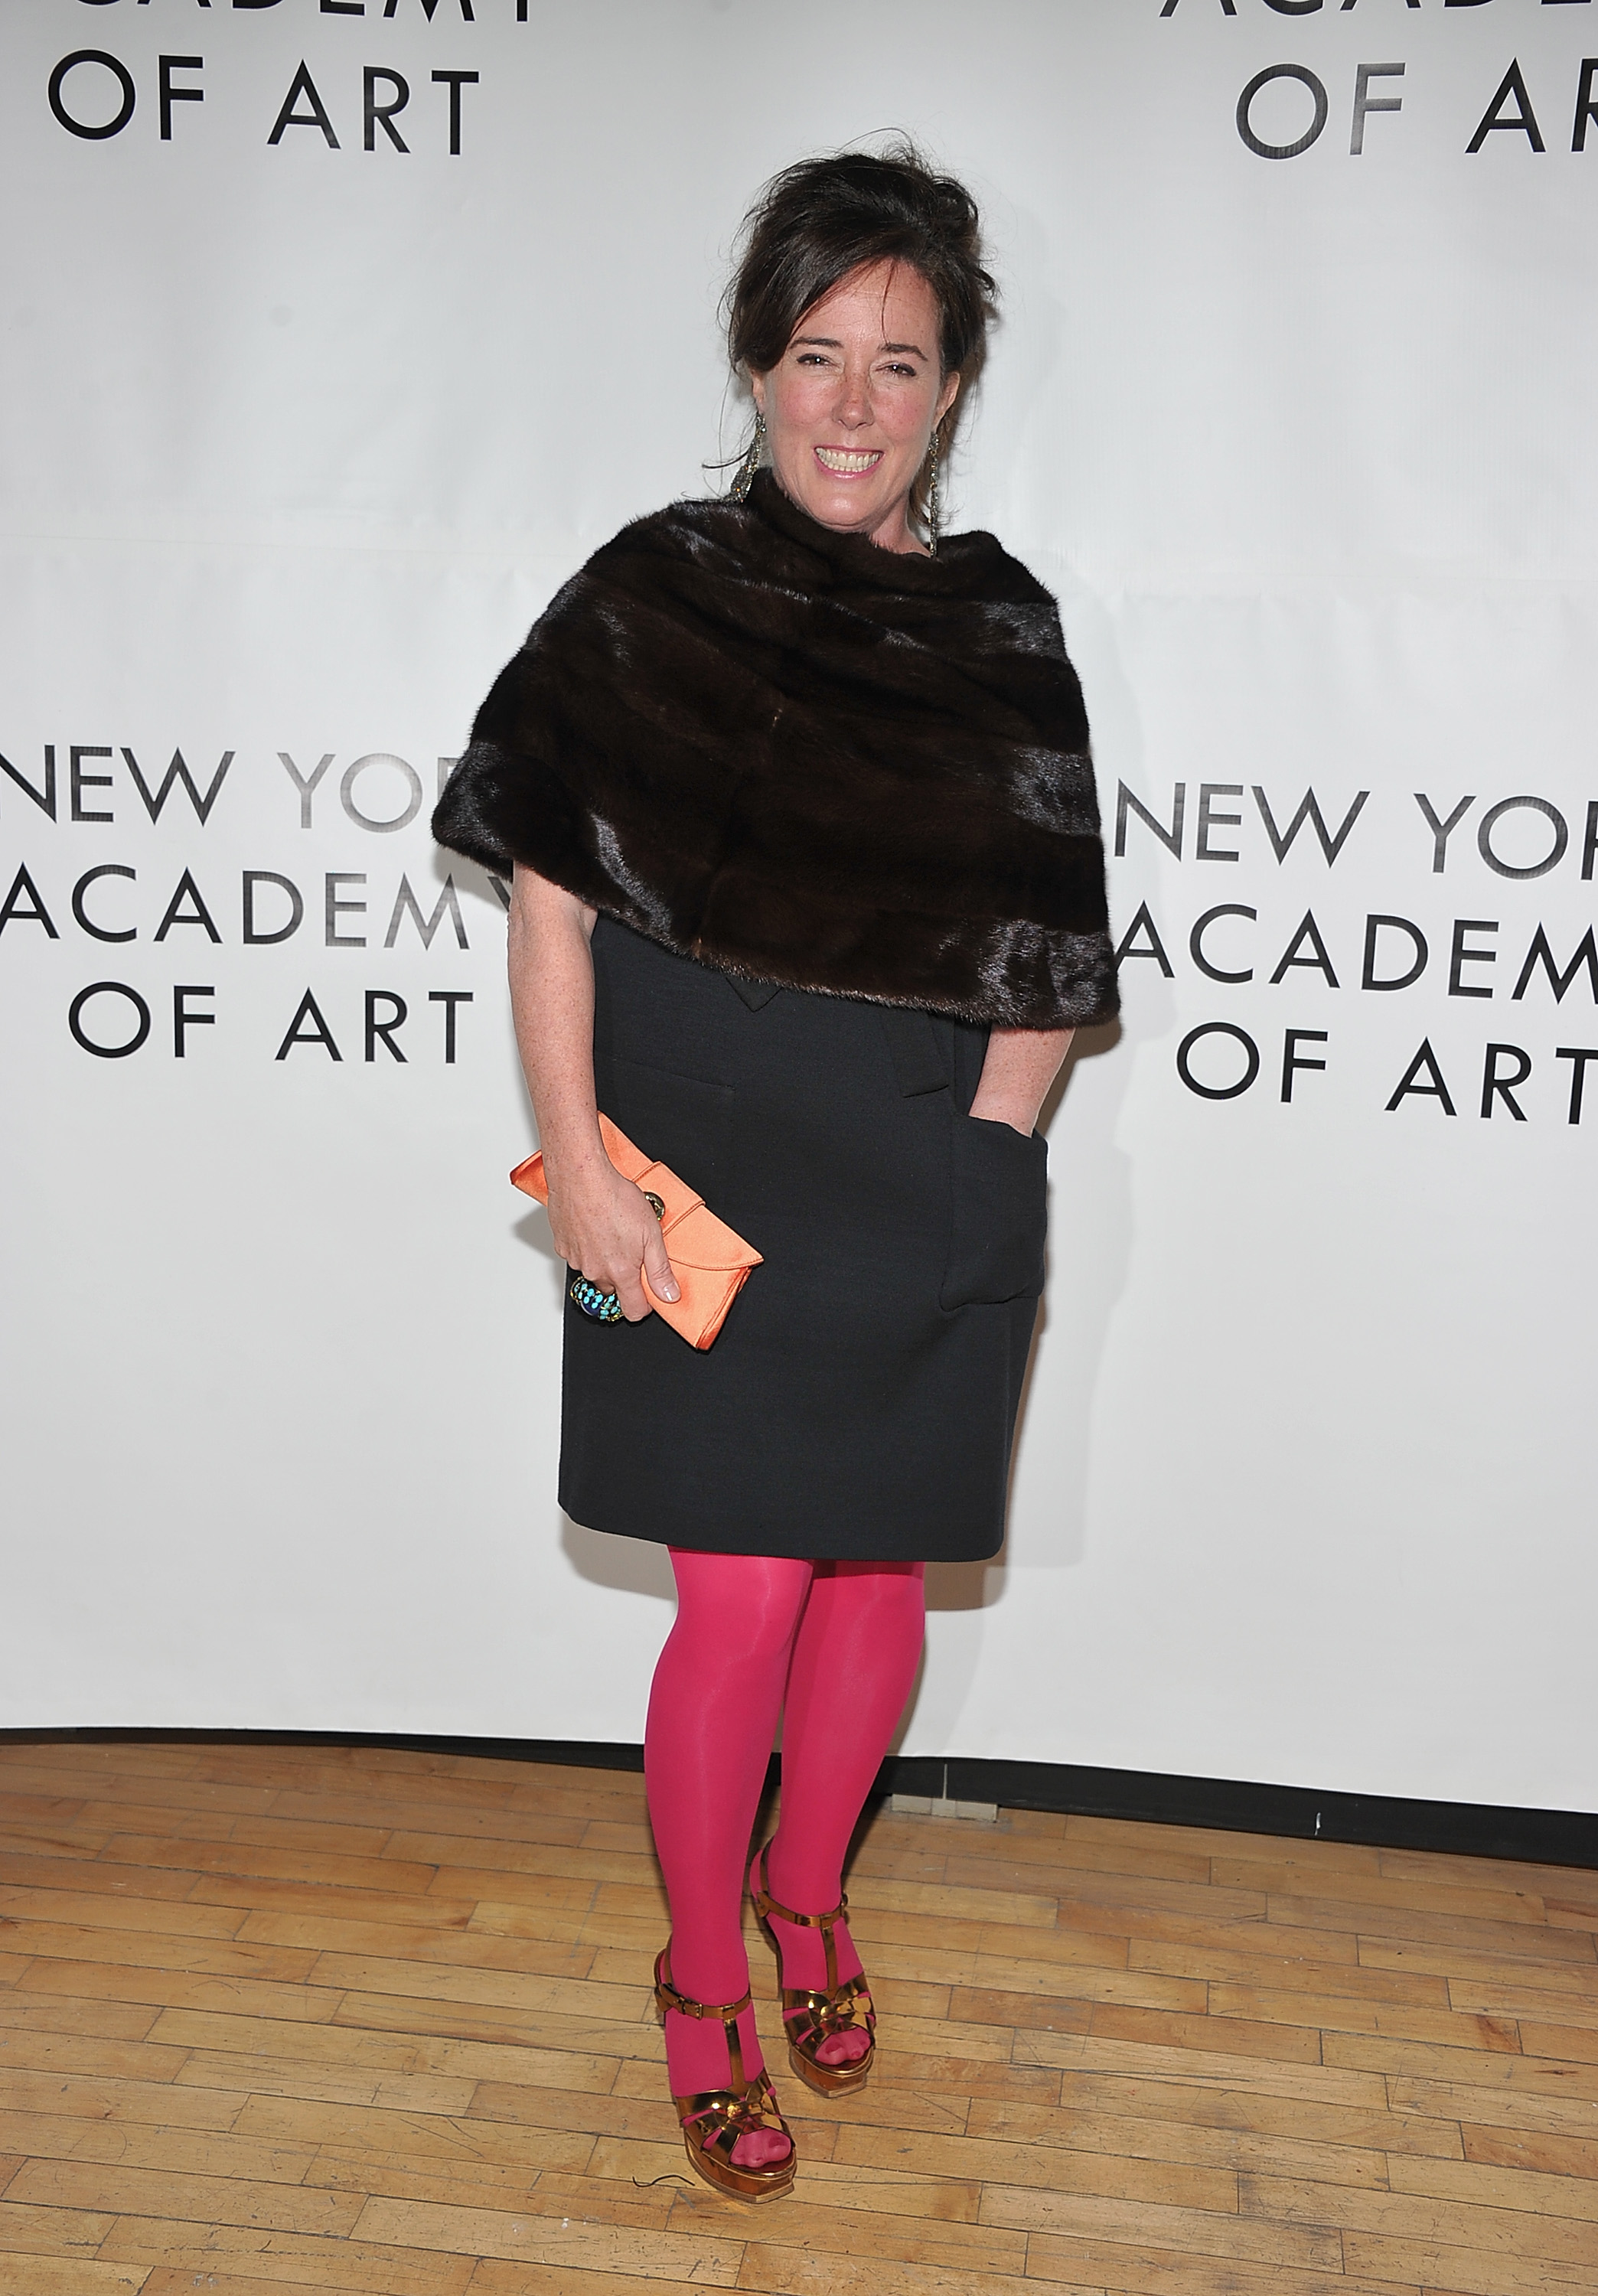 Kate Spade reportedly dies by suicide at 55.